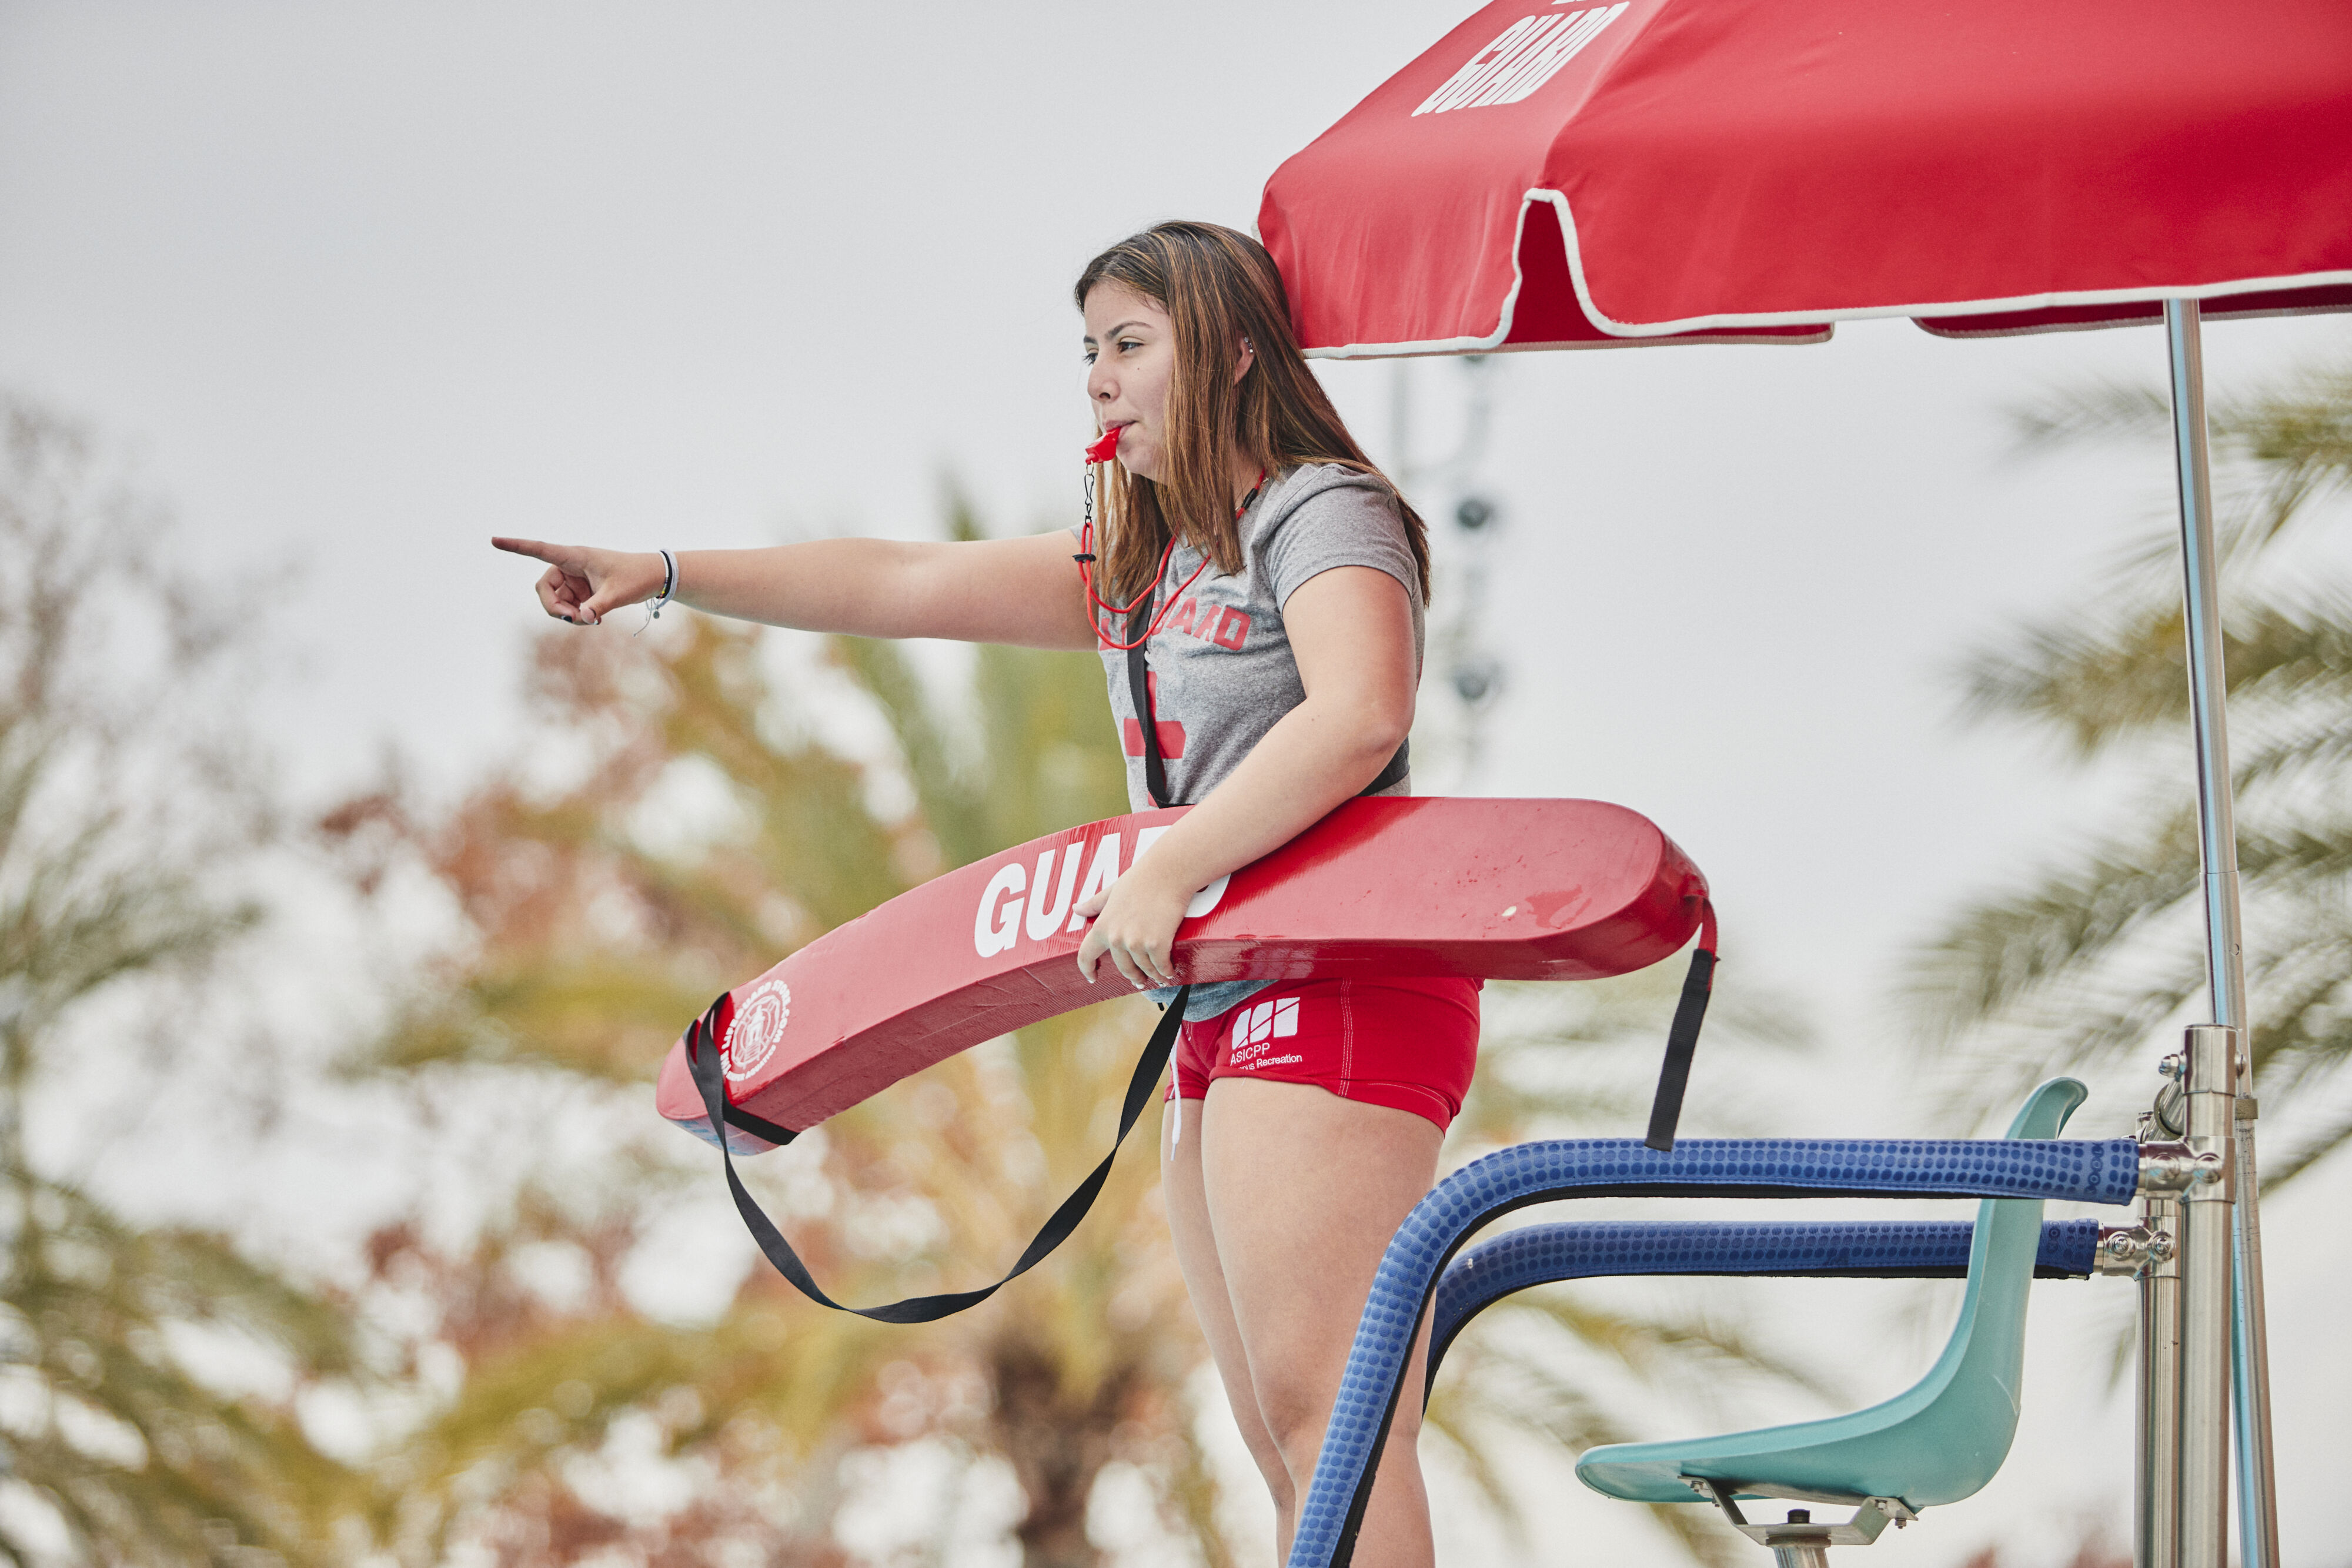 A lifeguard pointing at something